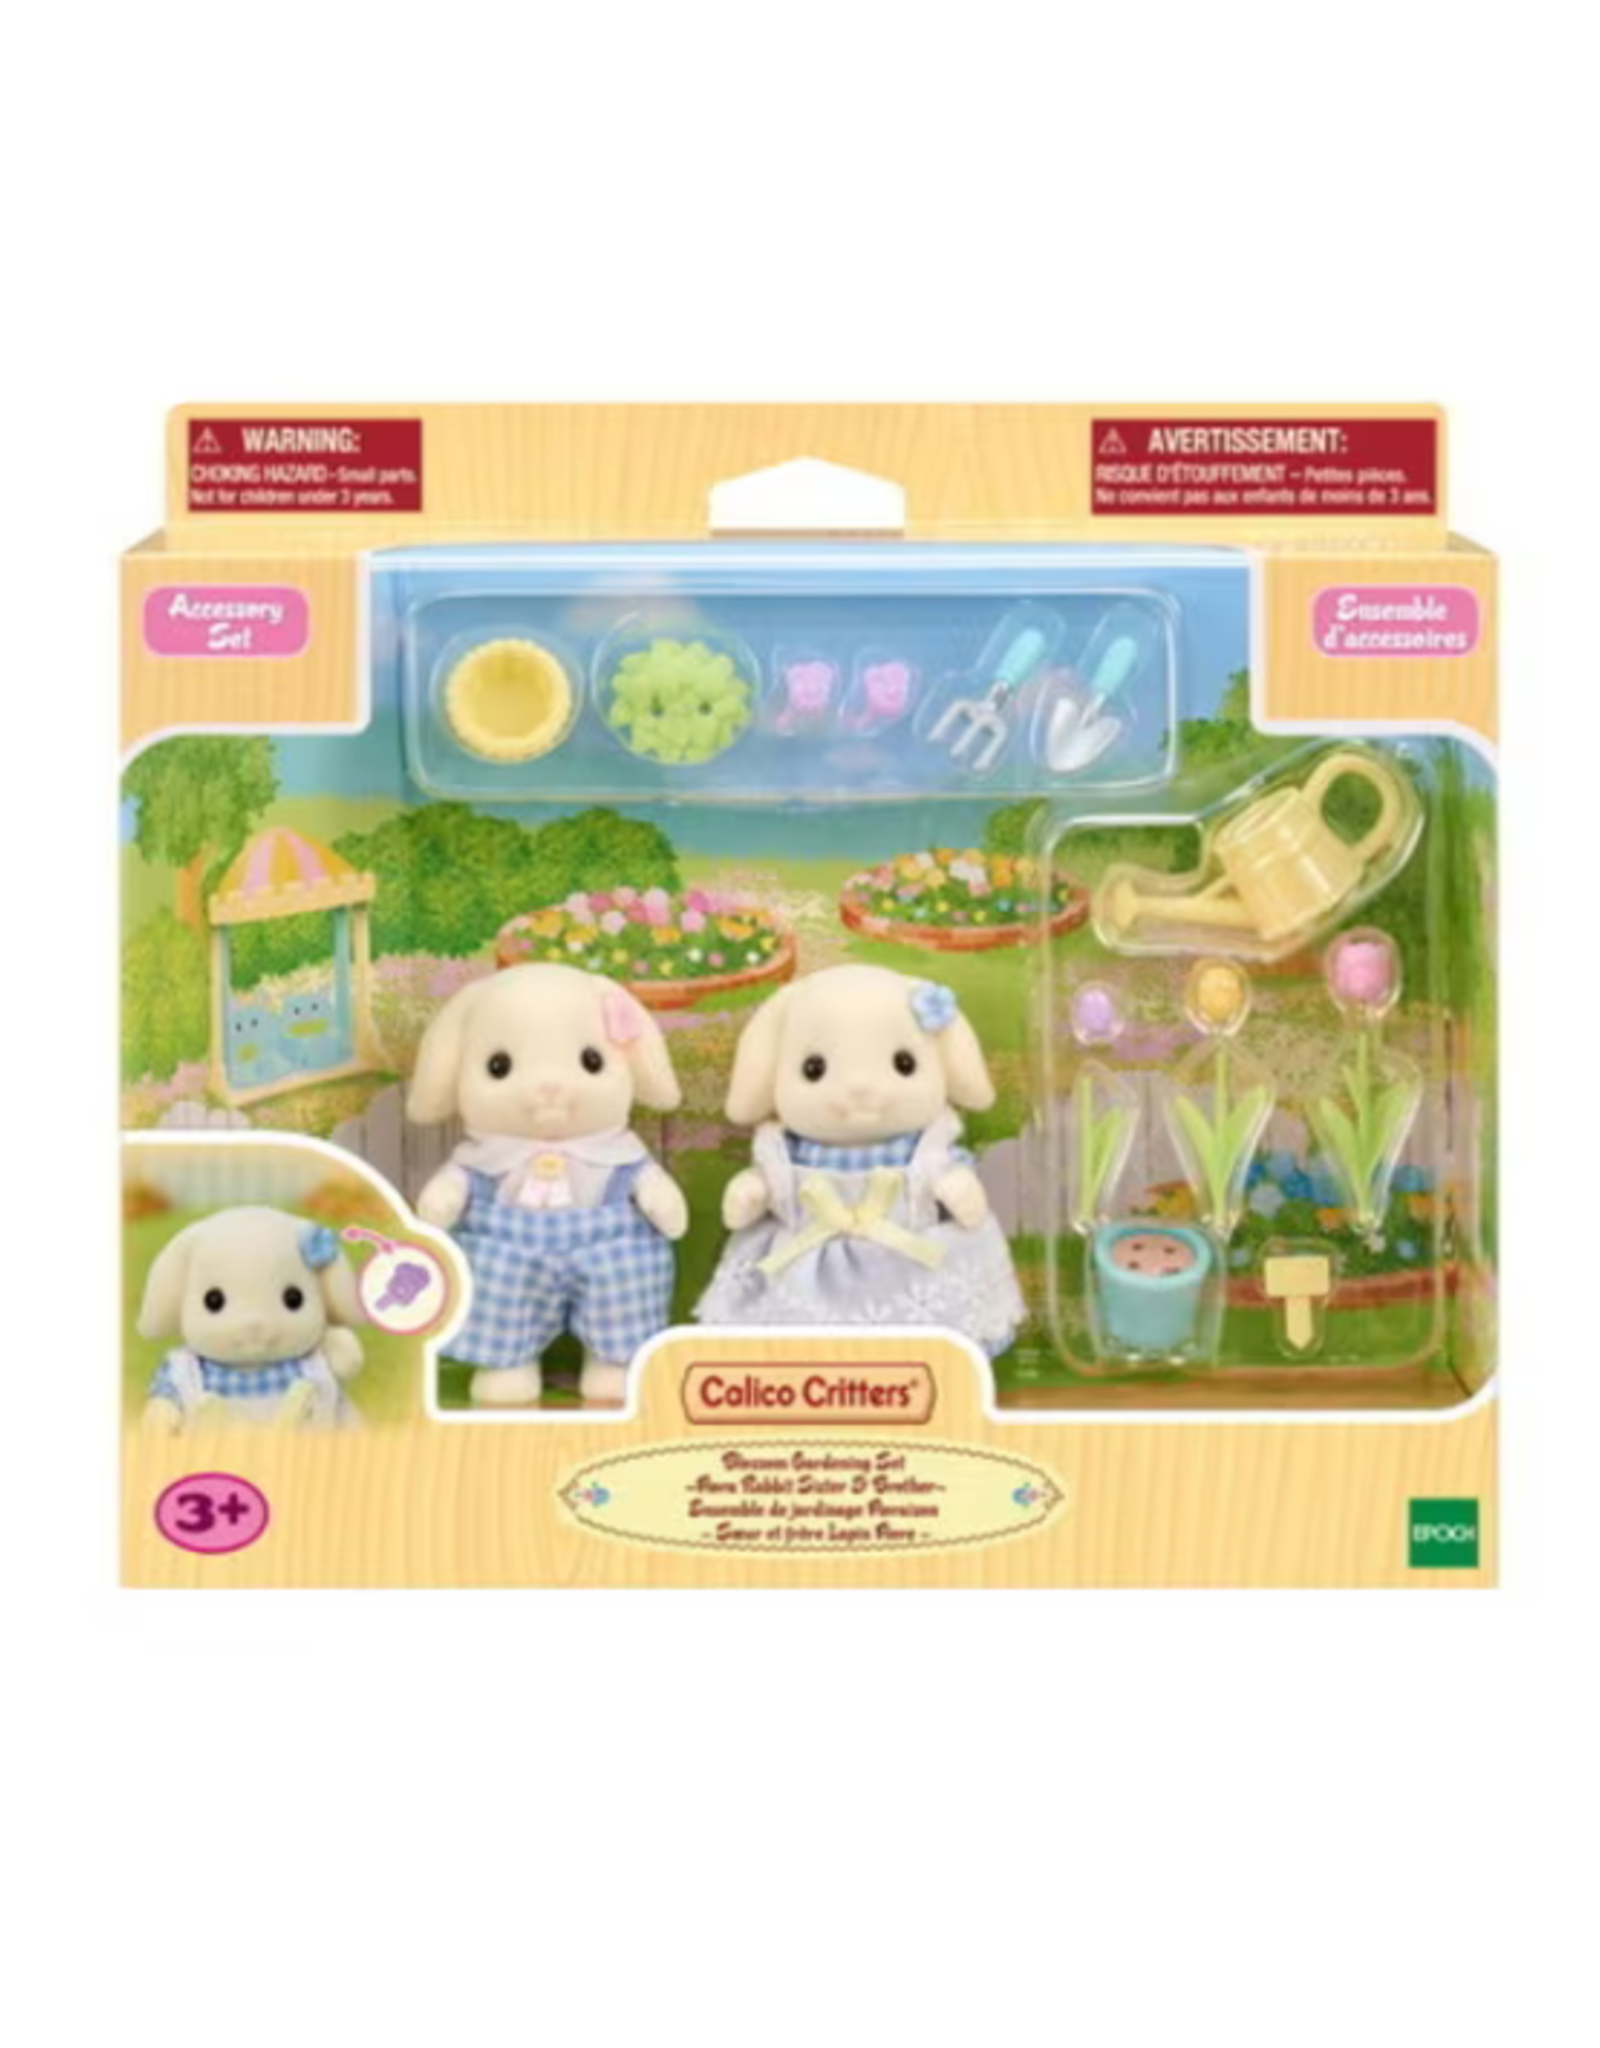 Calico Critters Calico Critters - Blossom Gardening Set